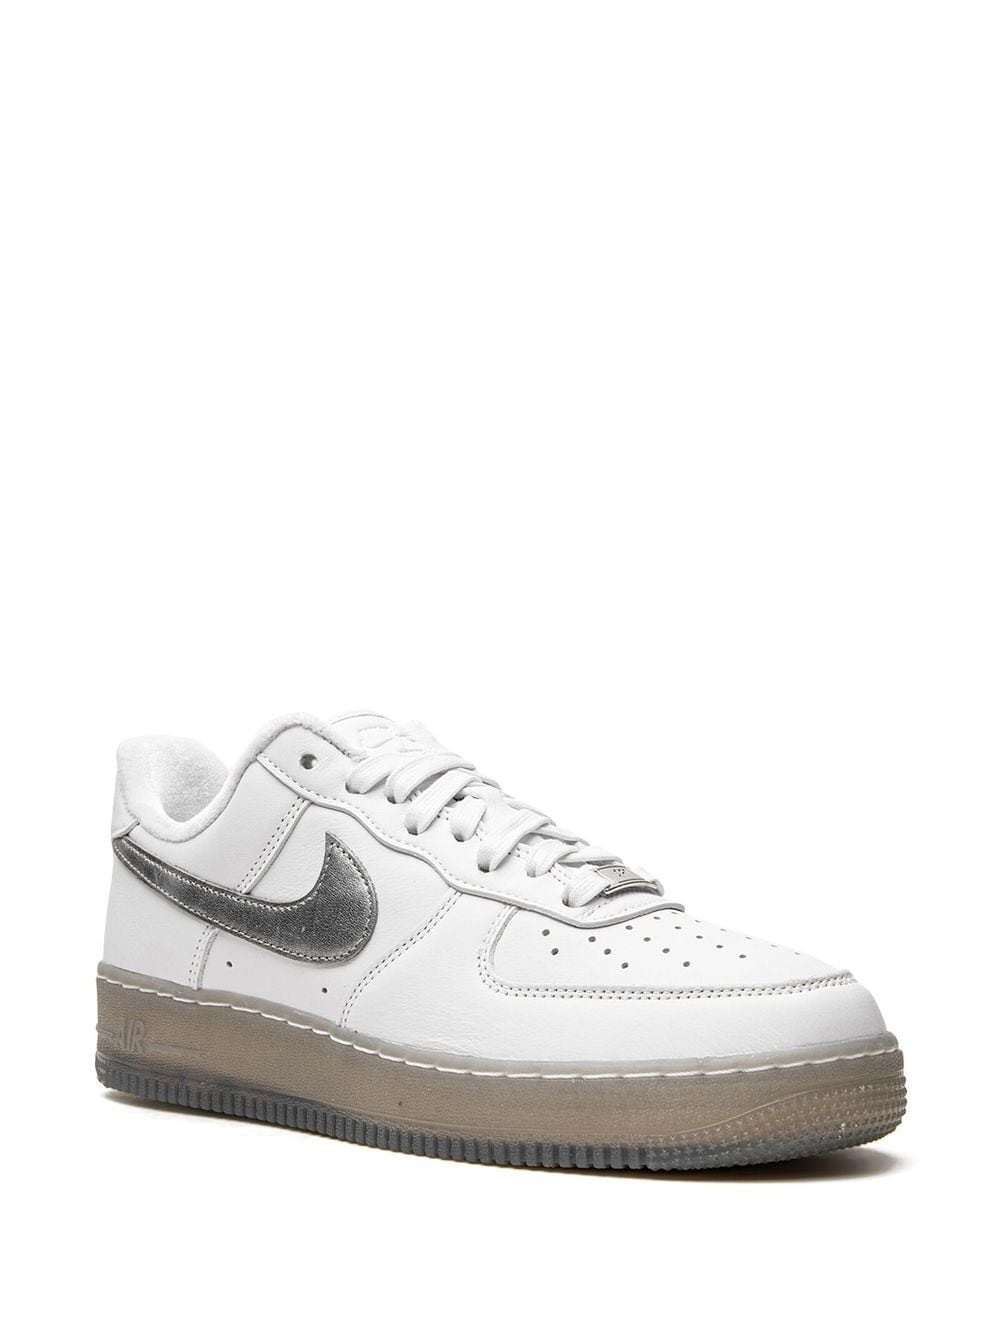 Air Force 1 "White/Metallic Silver" sneakers - 2